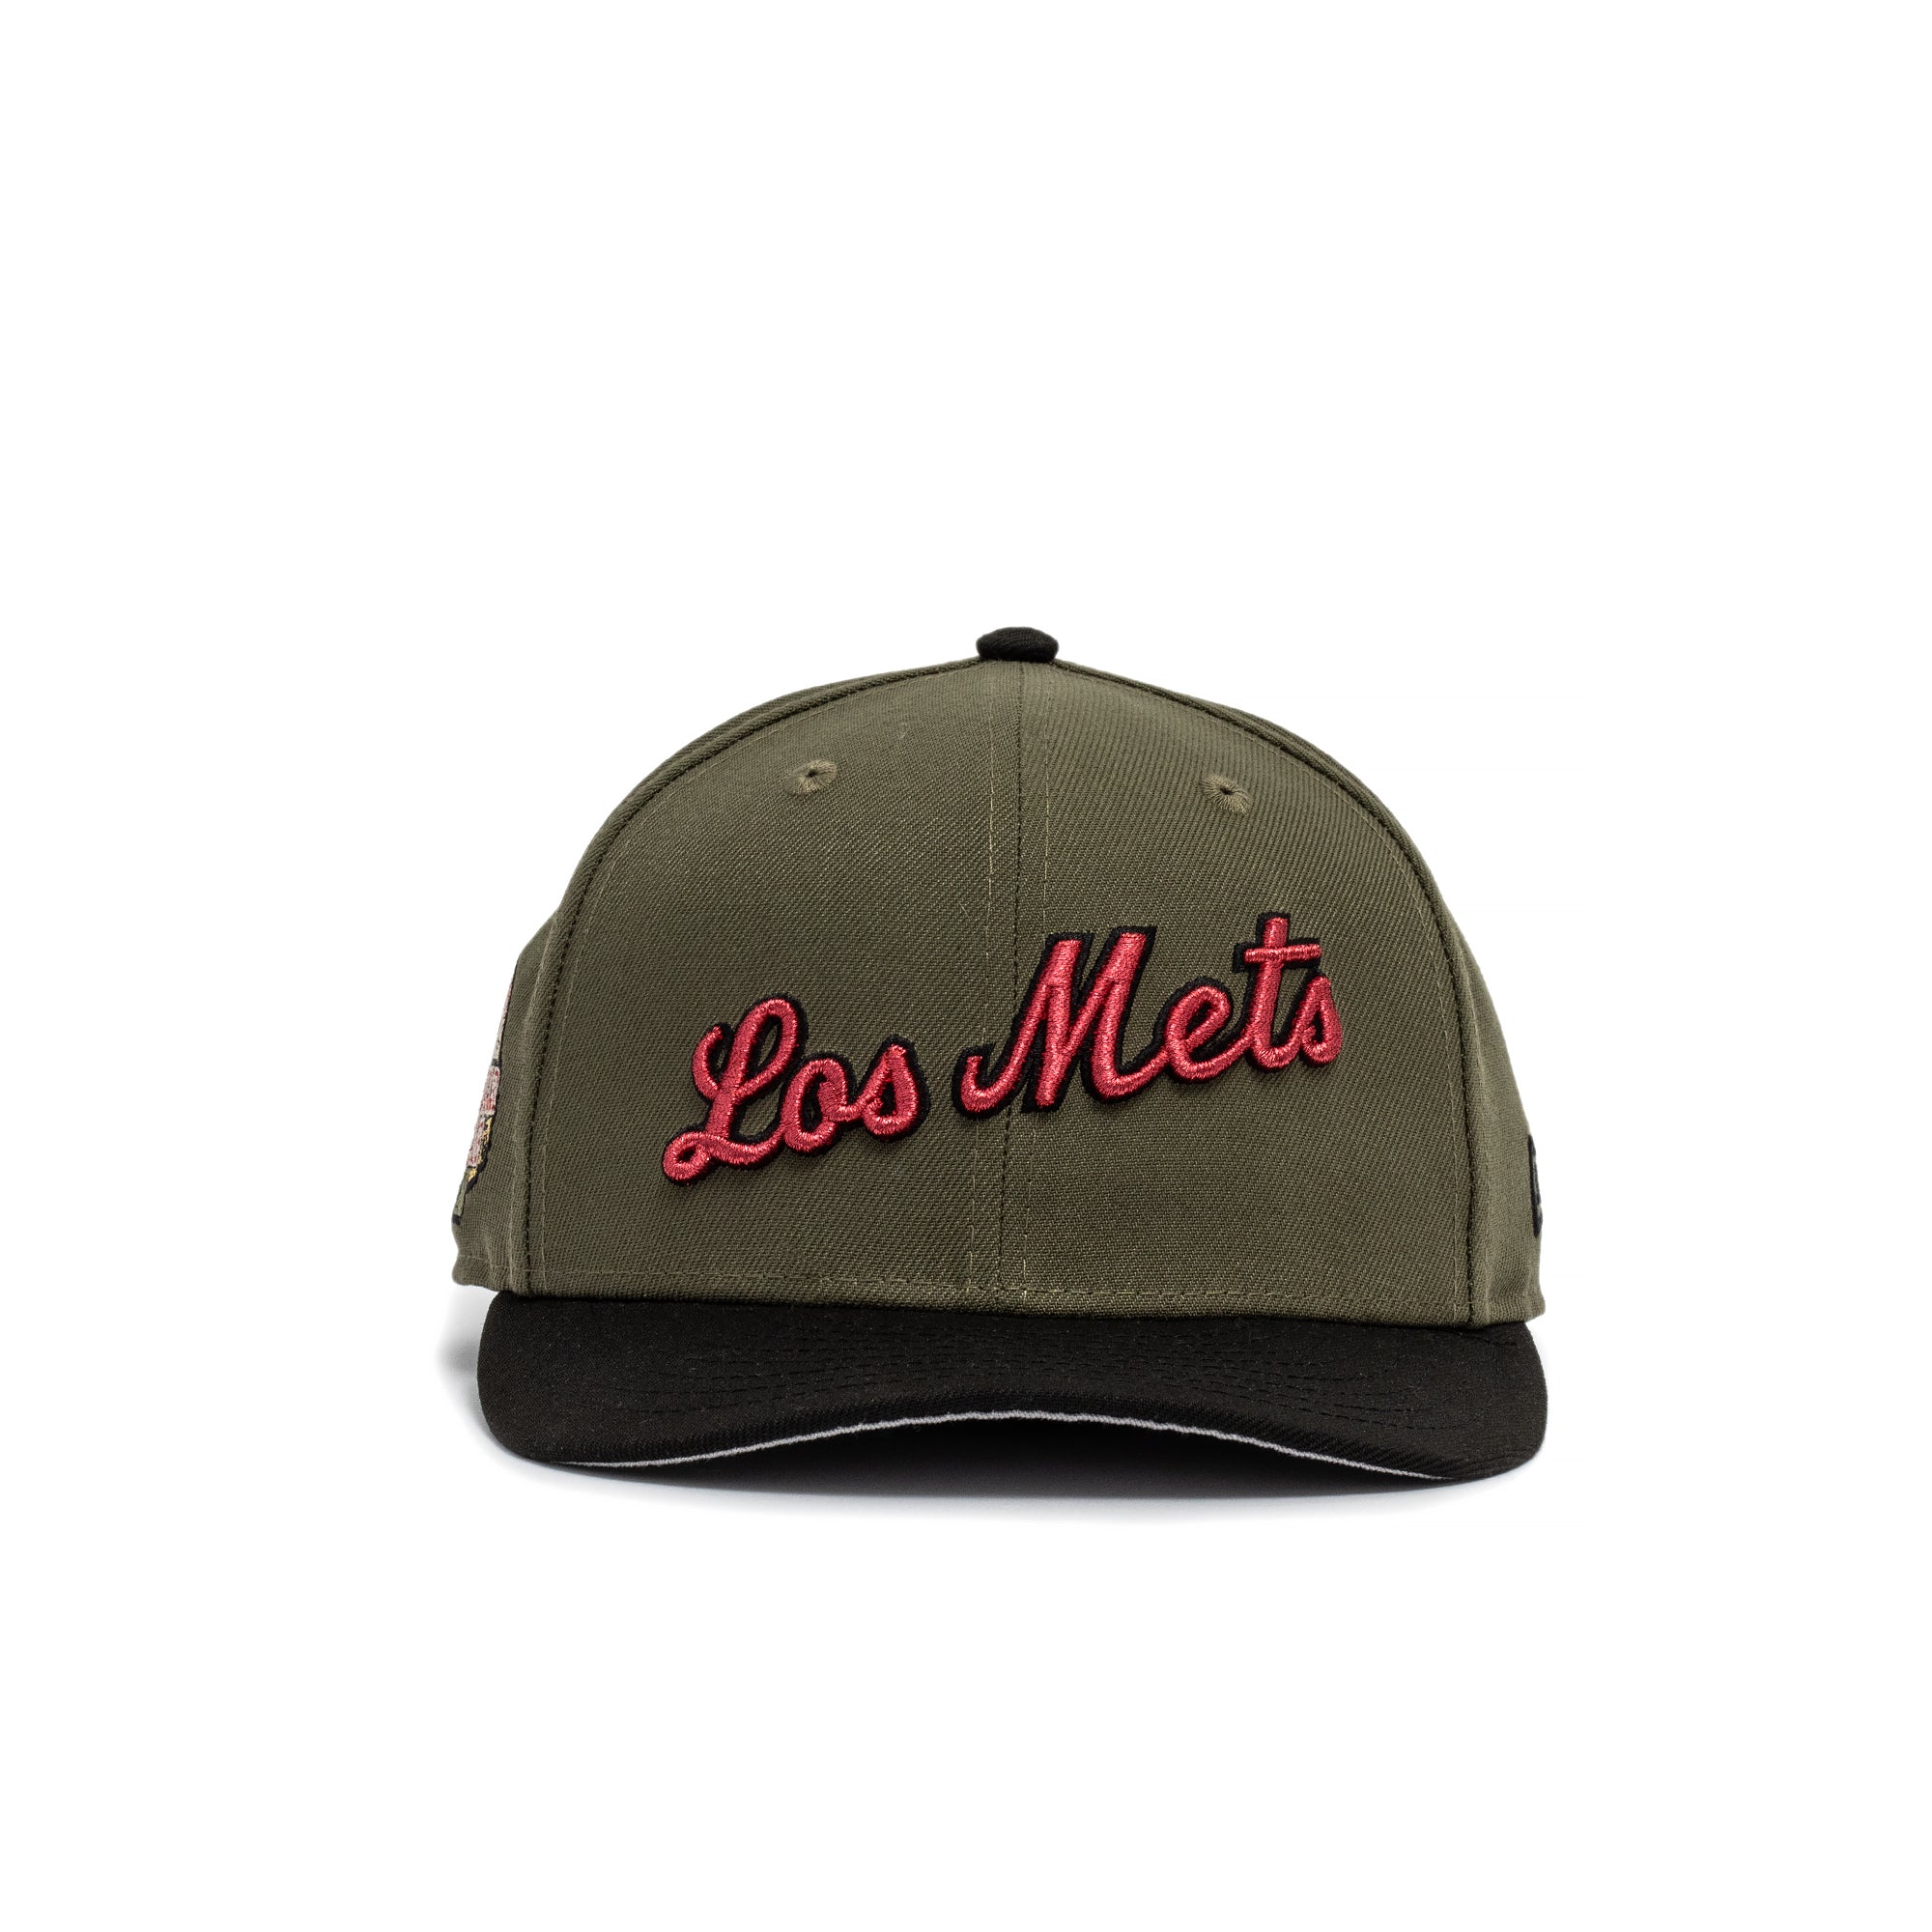 New Era 59FIFTY Los Mets 'The Cosmos' Fitted Hat